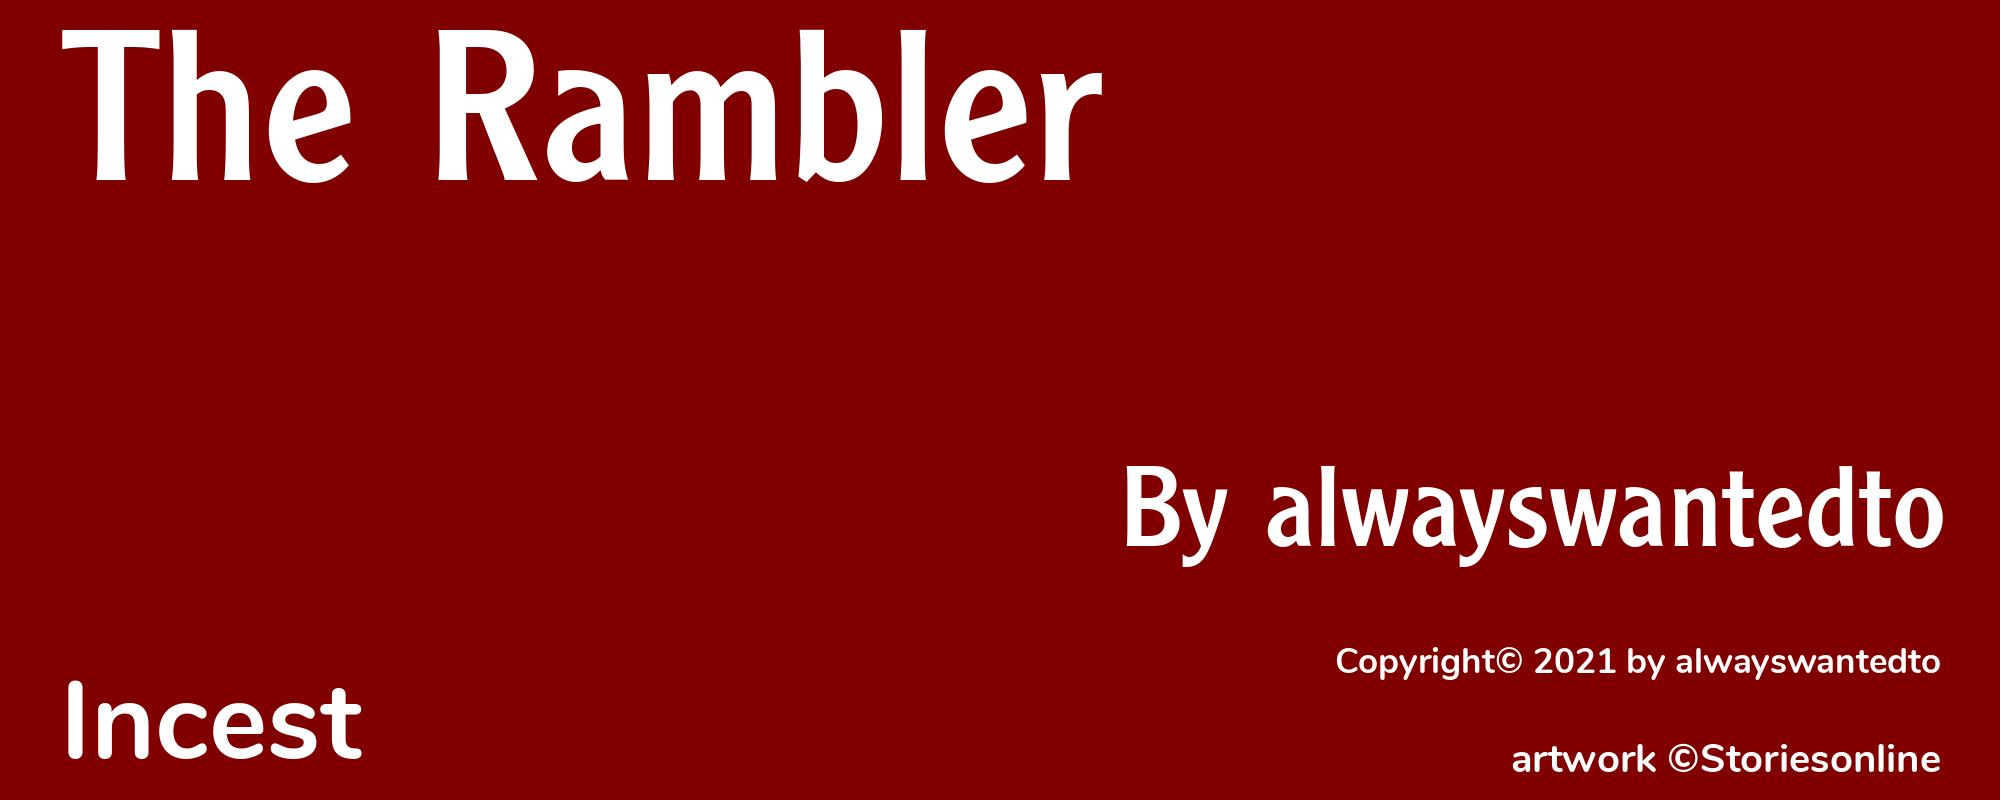 The Rambler - Cover